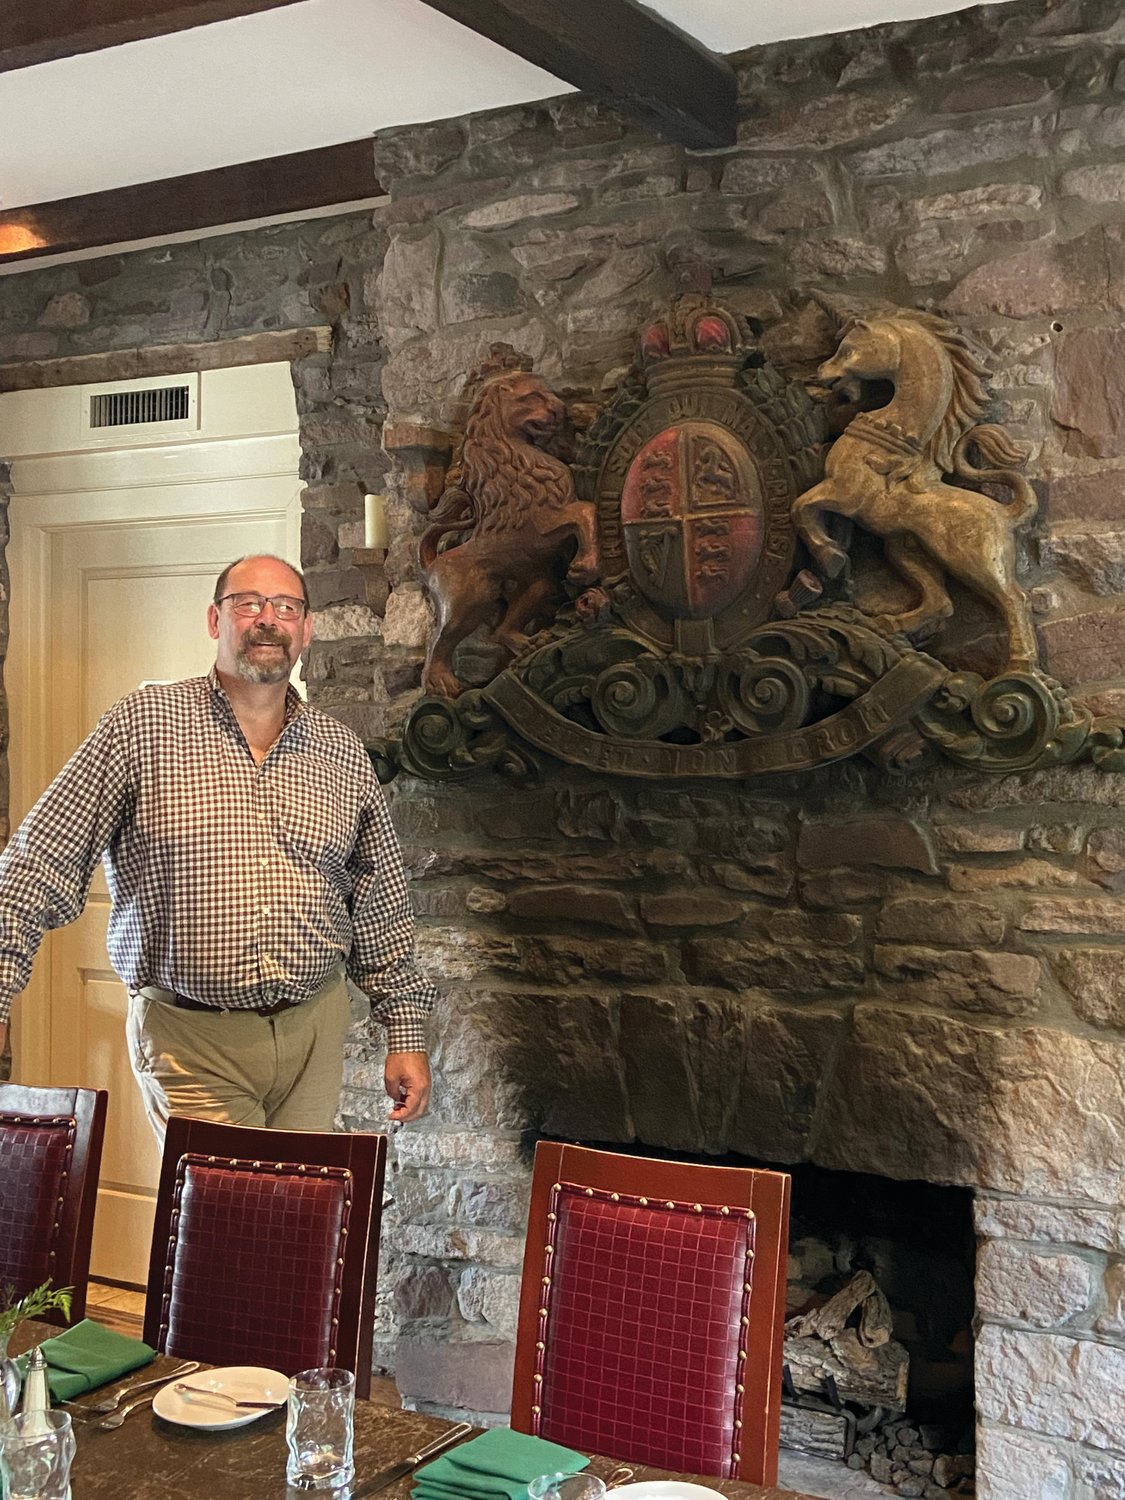 The British royal coat of arms at the Black Bass Hotel, holds special meaning for Grant Ross, general manager of the Black Bass Inn.